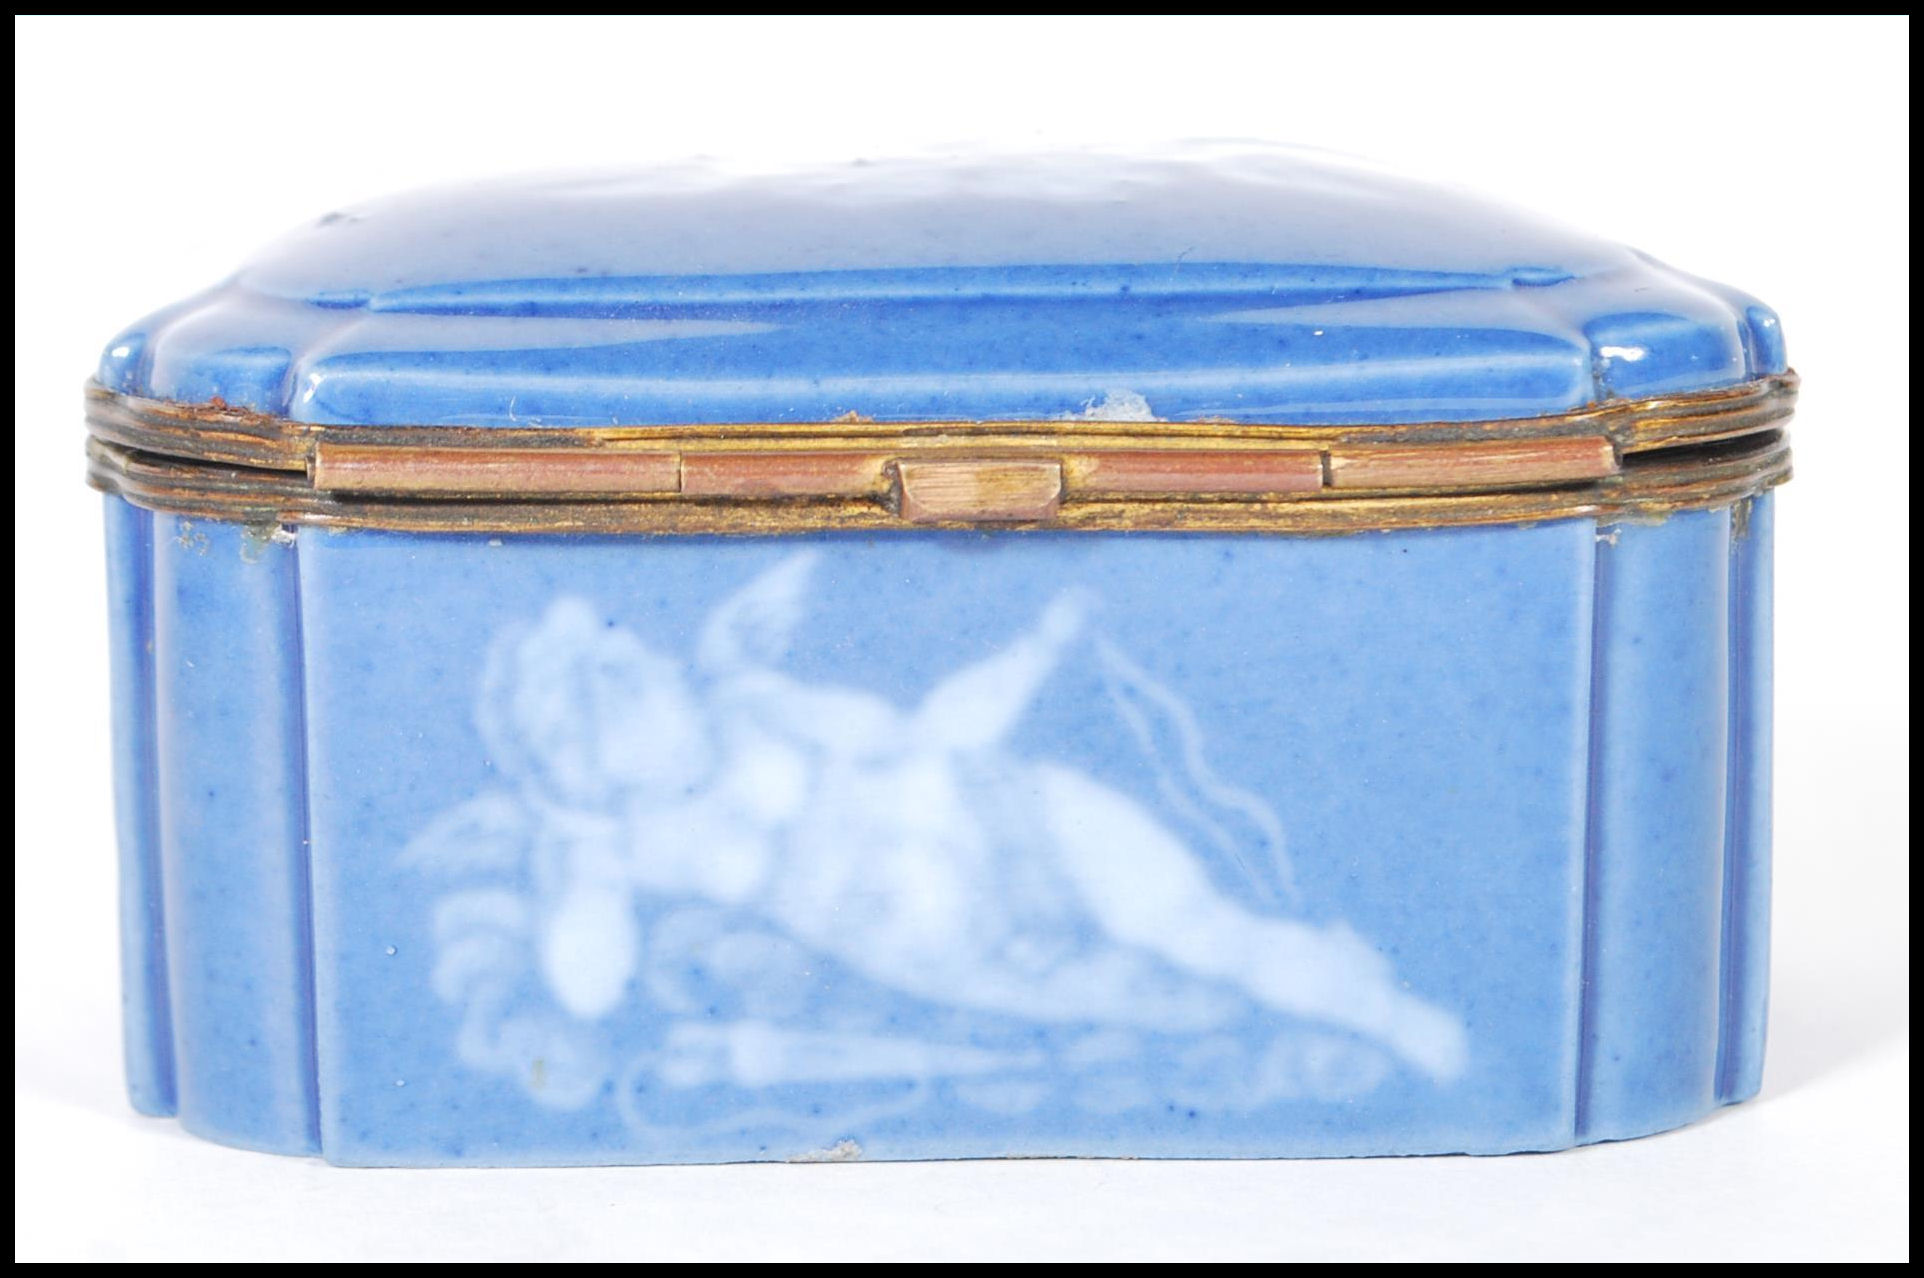 An early 20th Century continental German porcelain blue ceramic casket / trinket box with a pat - Image 5 of 9